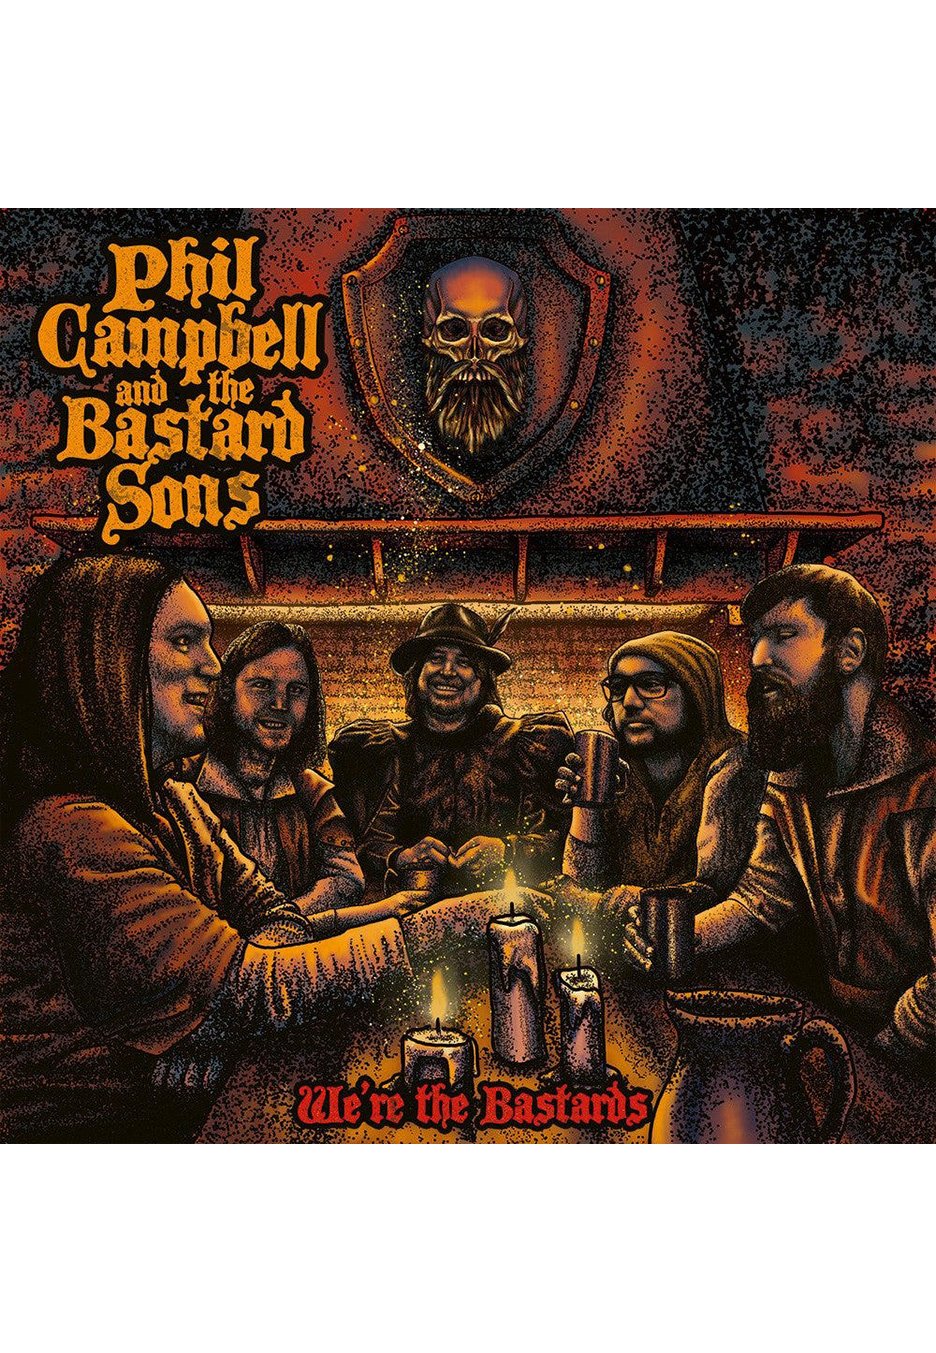 Phil Campbell And The Bastard Sons - We're The Bastards  - 2 Vinyl